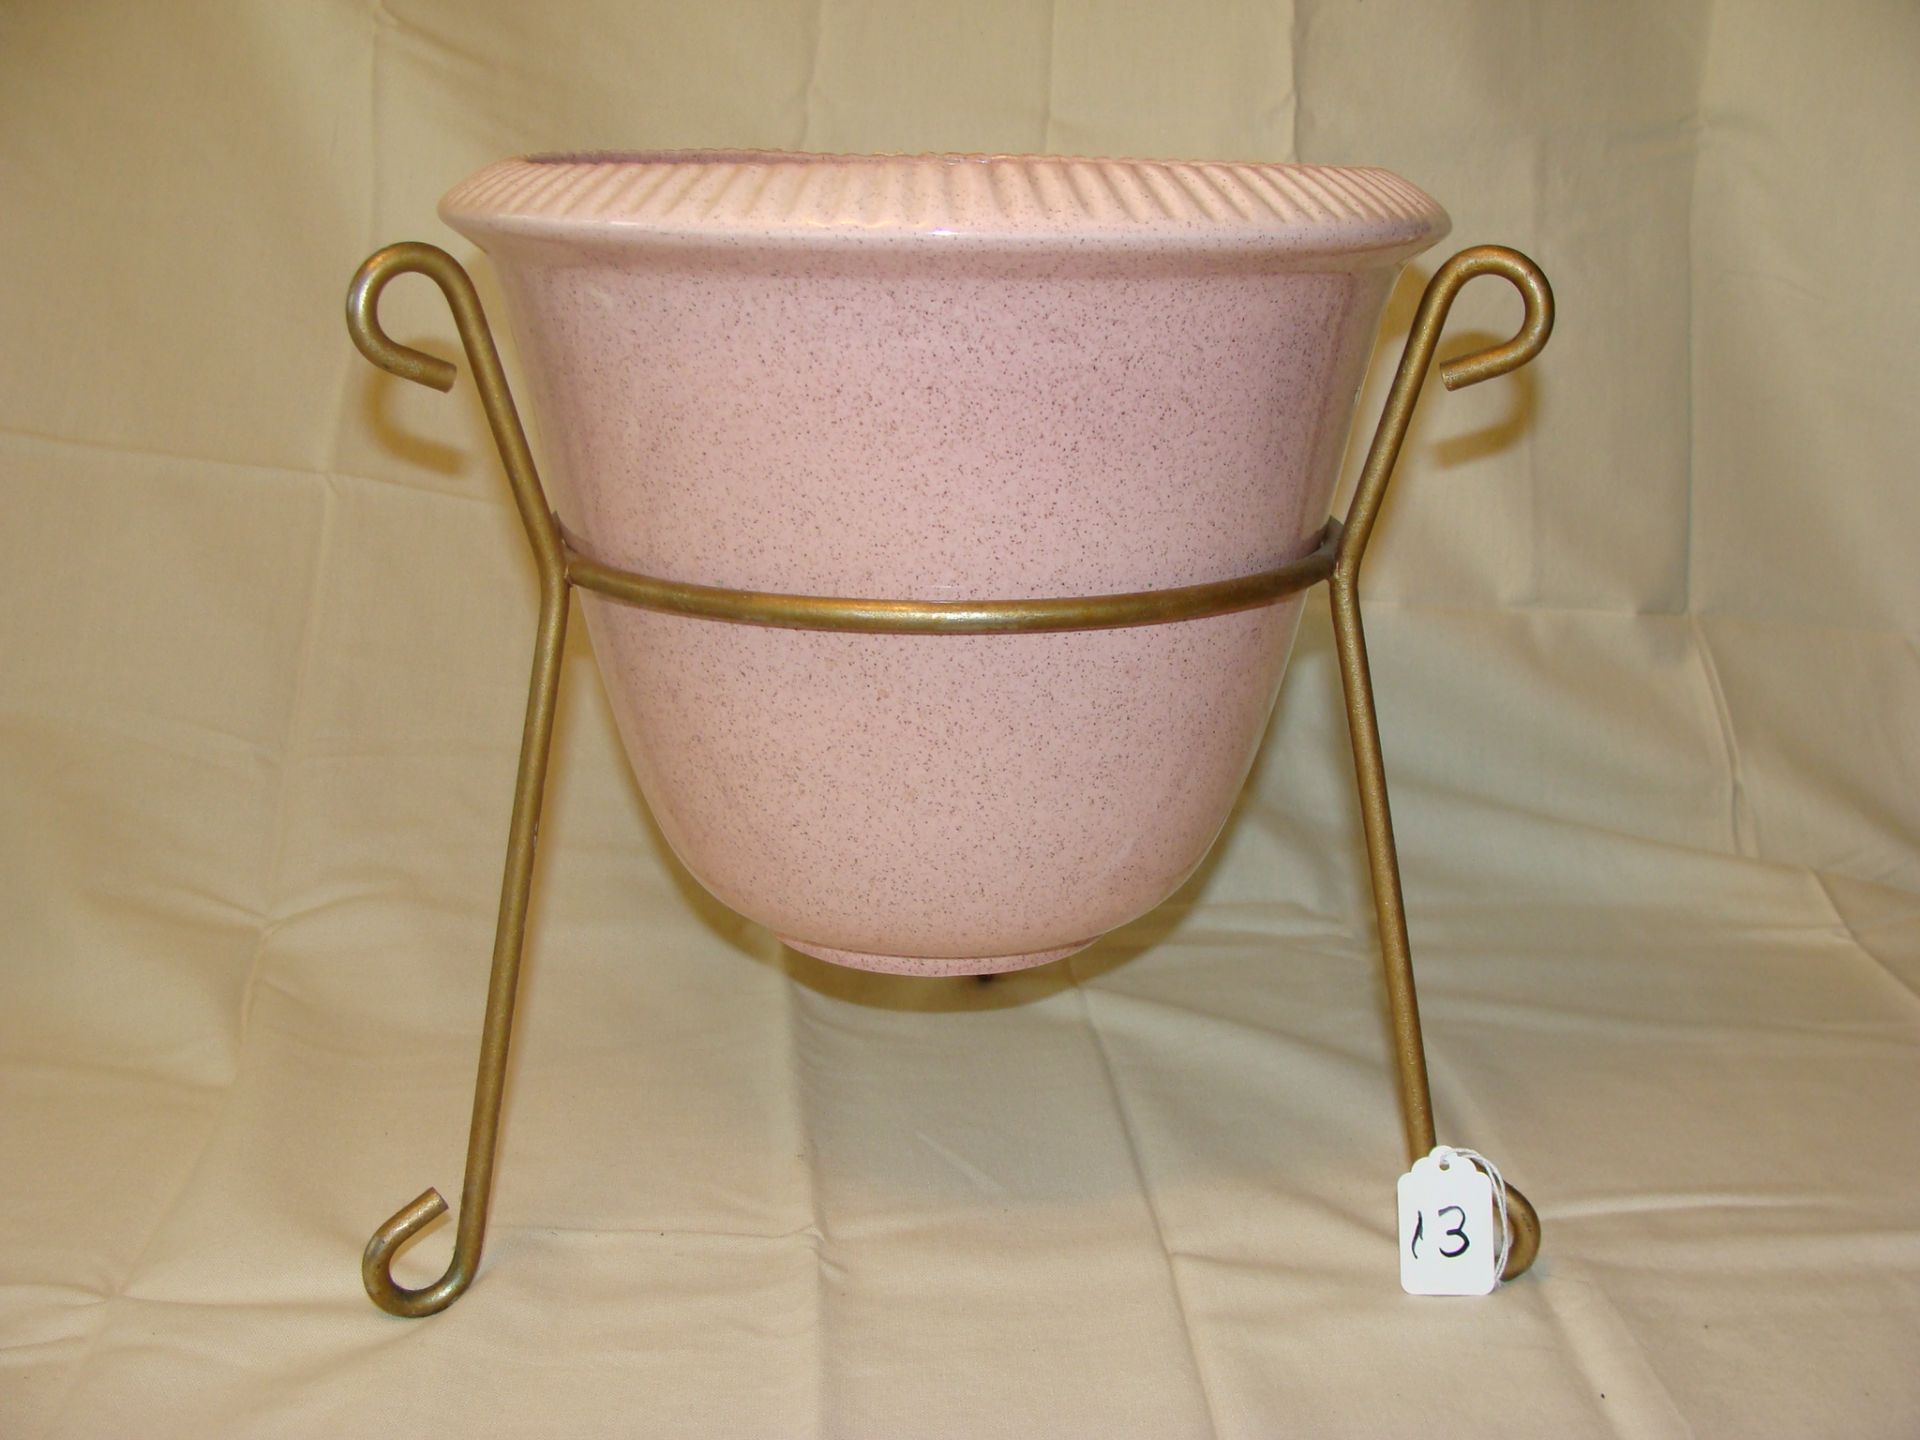 Redwing Planter on Stand